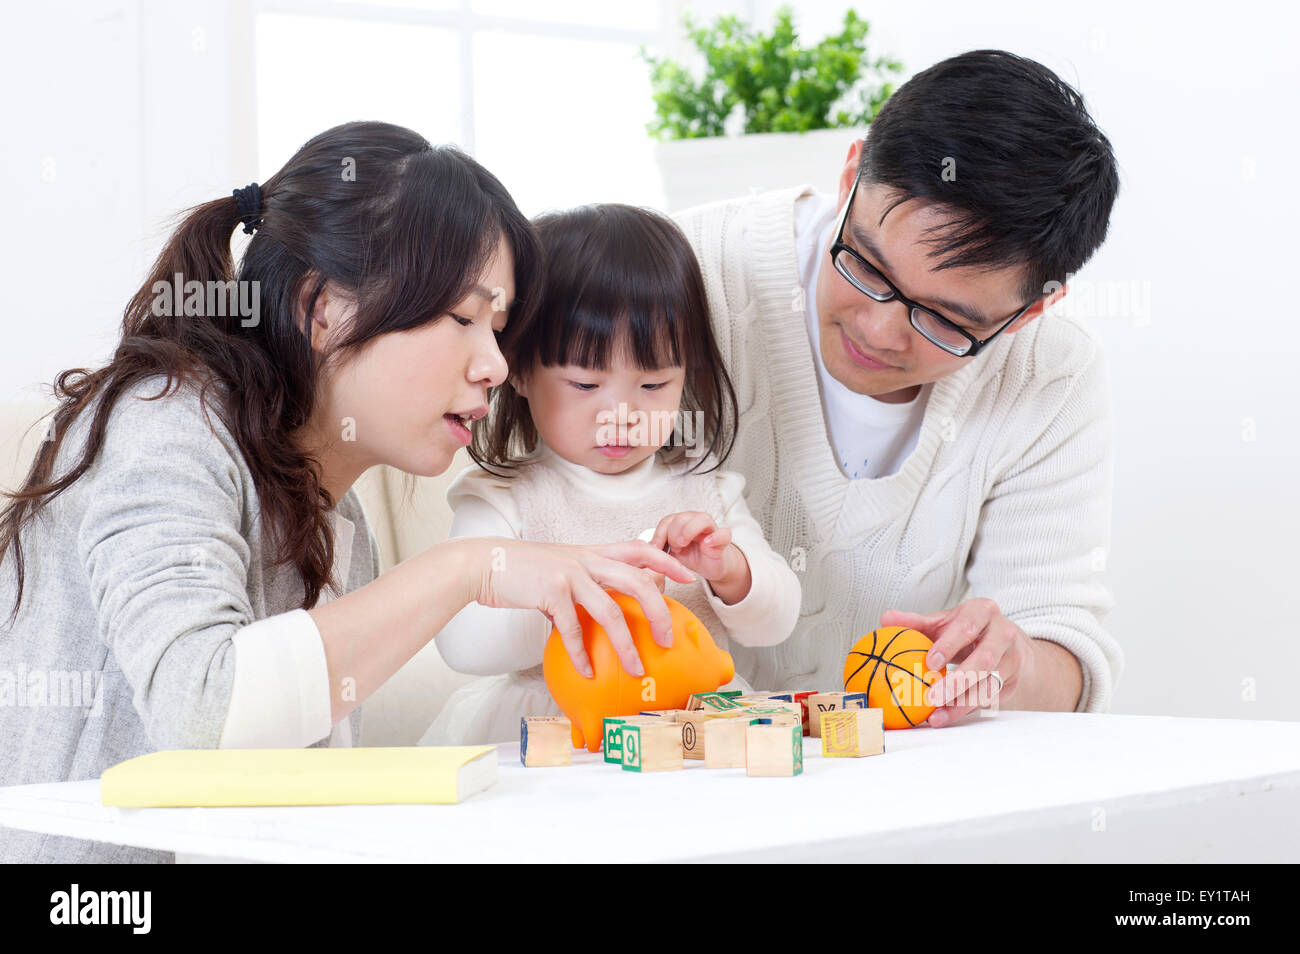 Family with one child playing together, Stock Photo